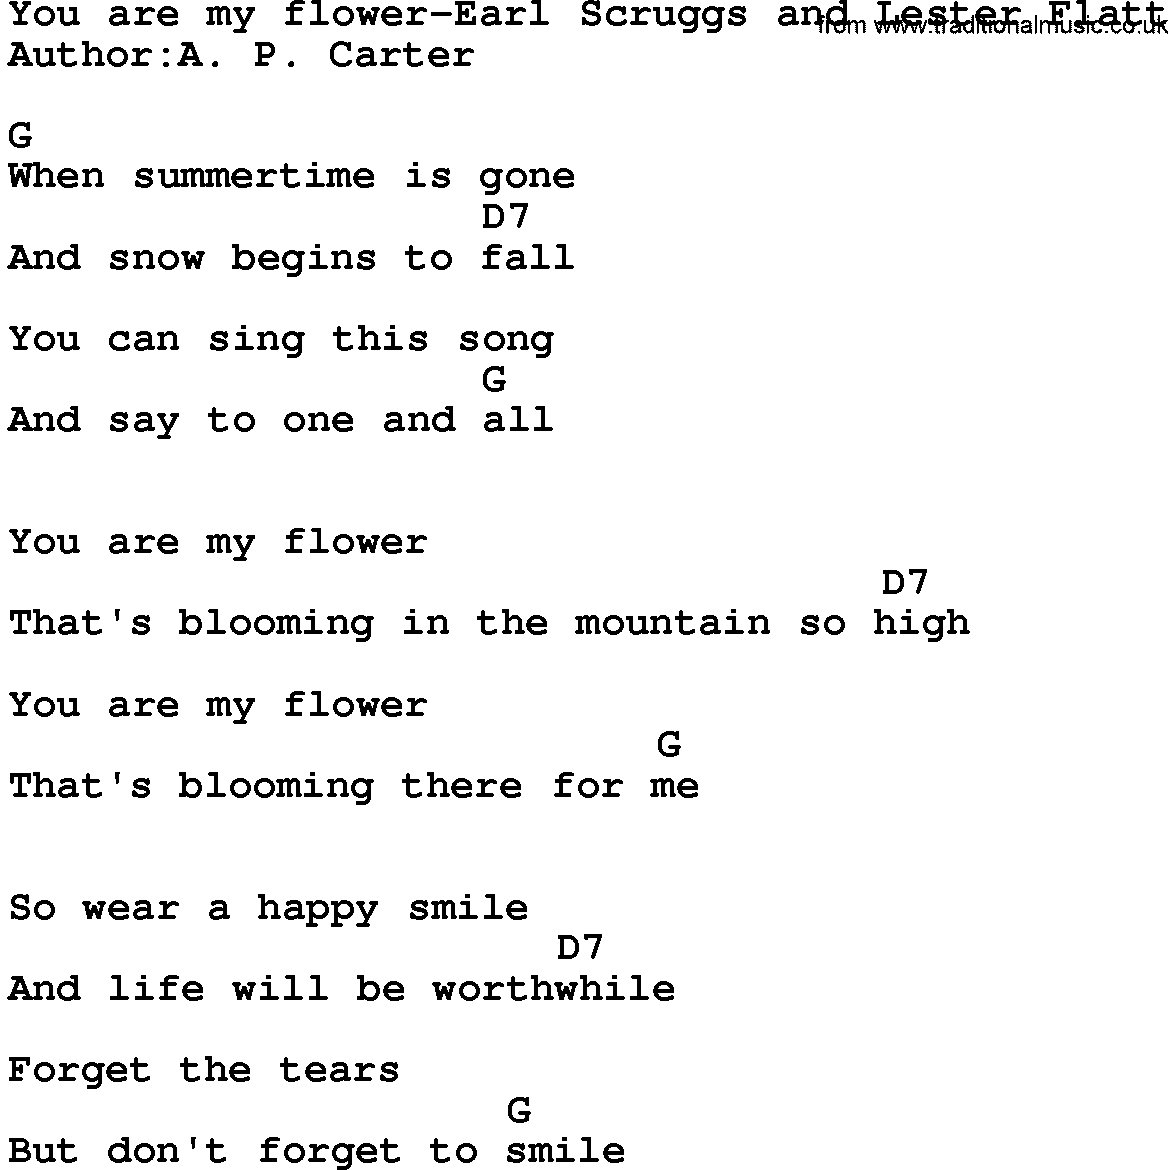 Country music song: You Are My Flower-Earl Scruggs And Lester Flatt lyrics and chords